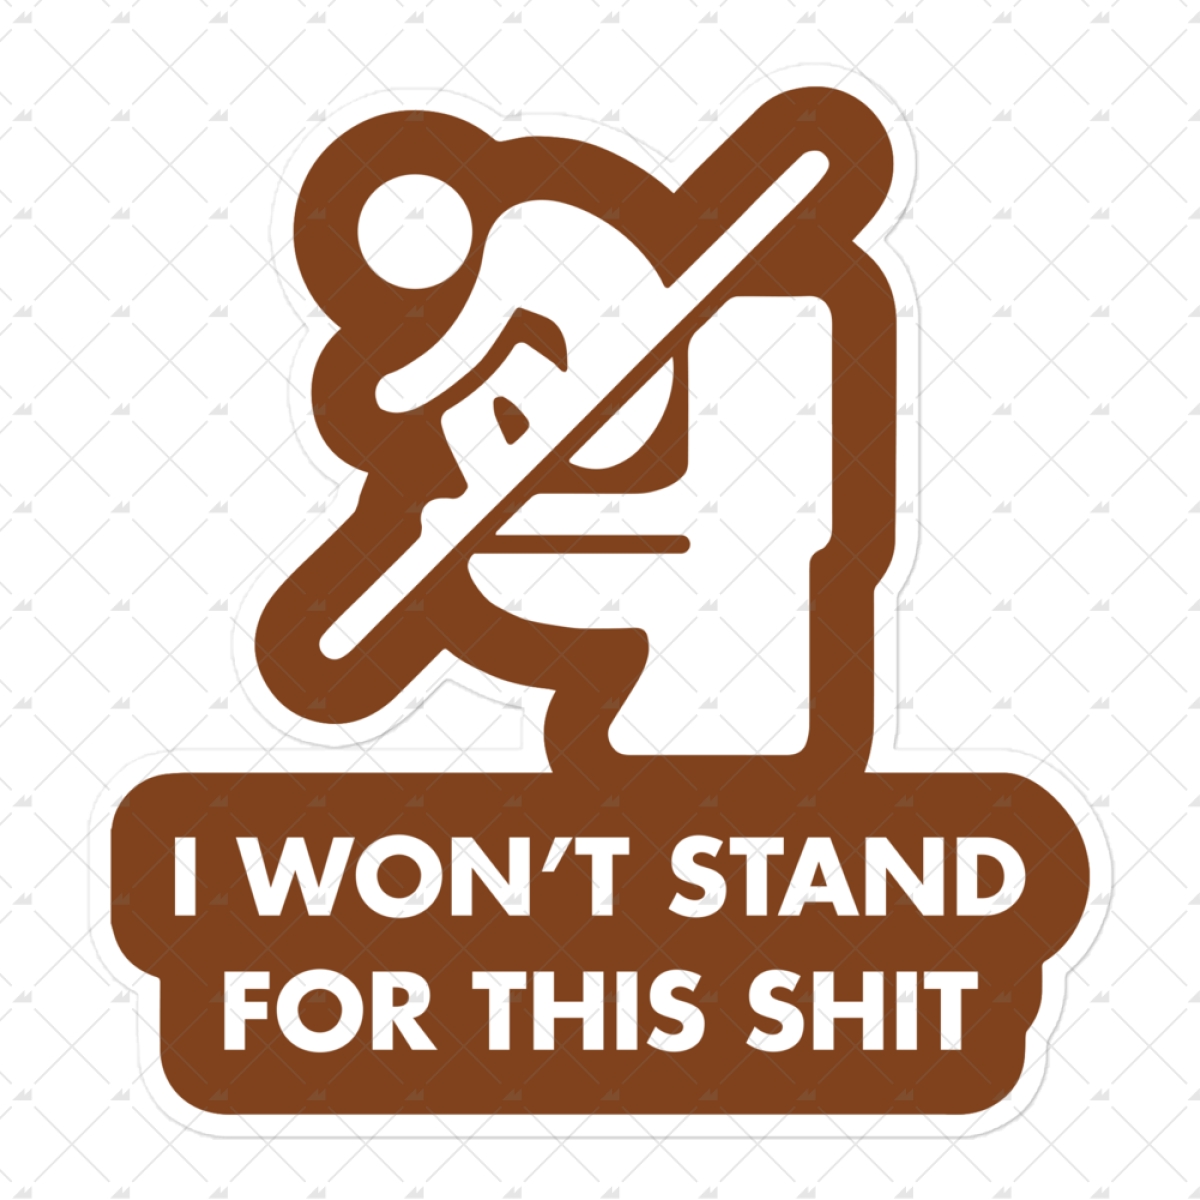 I Wont Stand For This Shit Sticker M00nshot